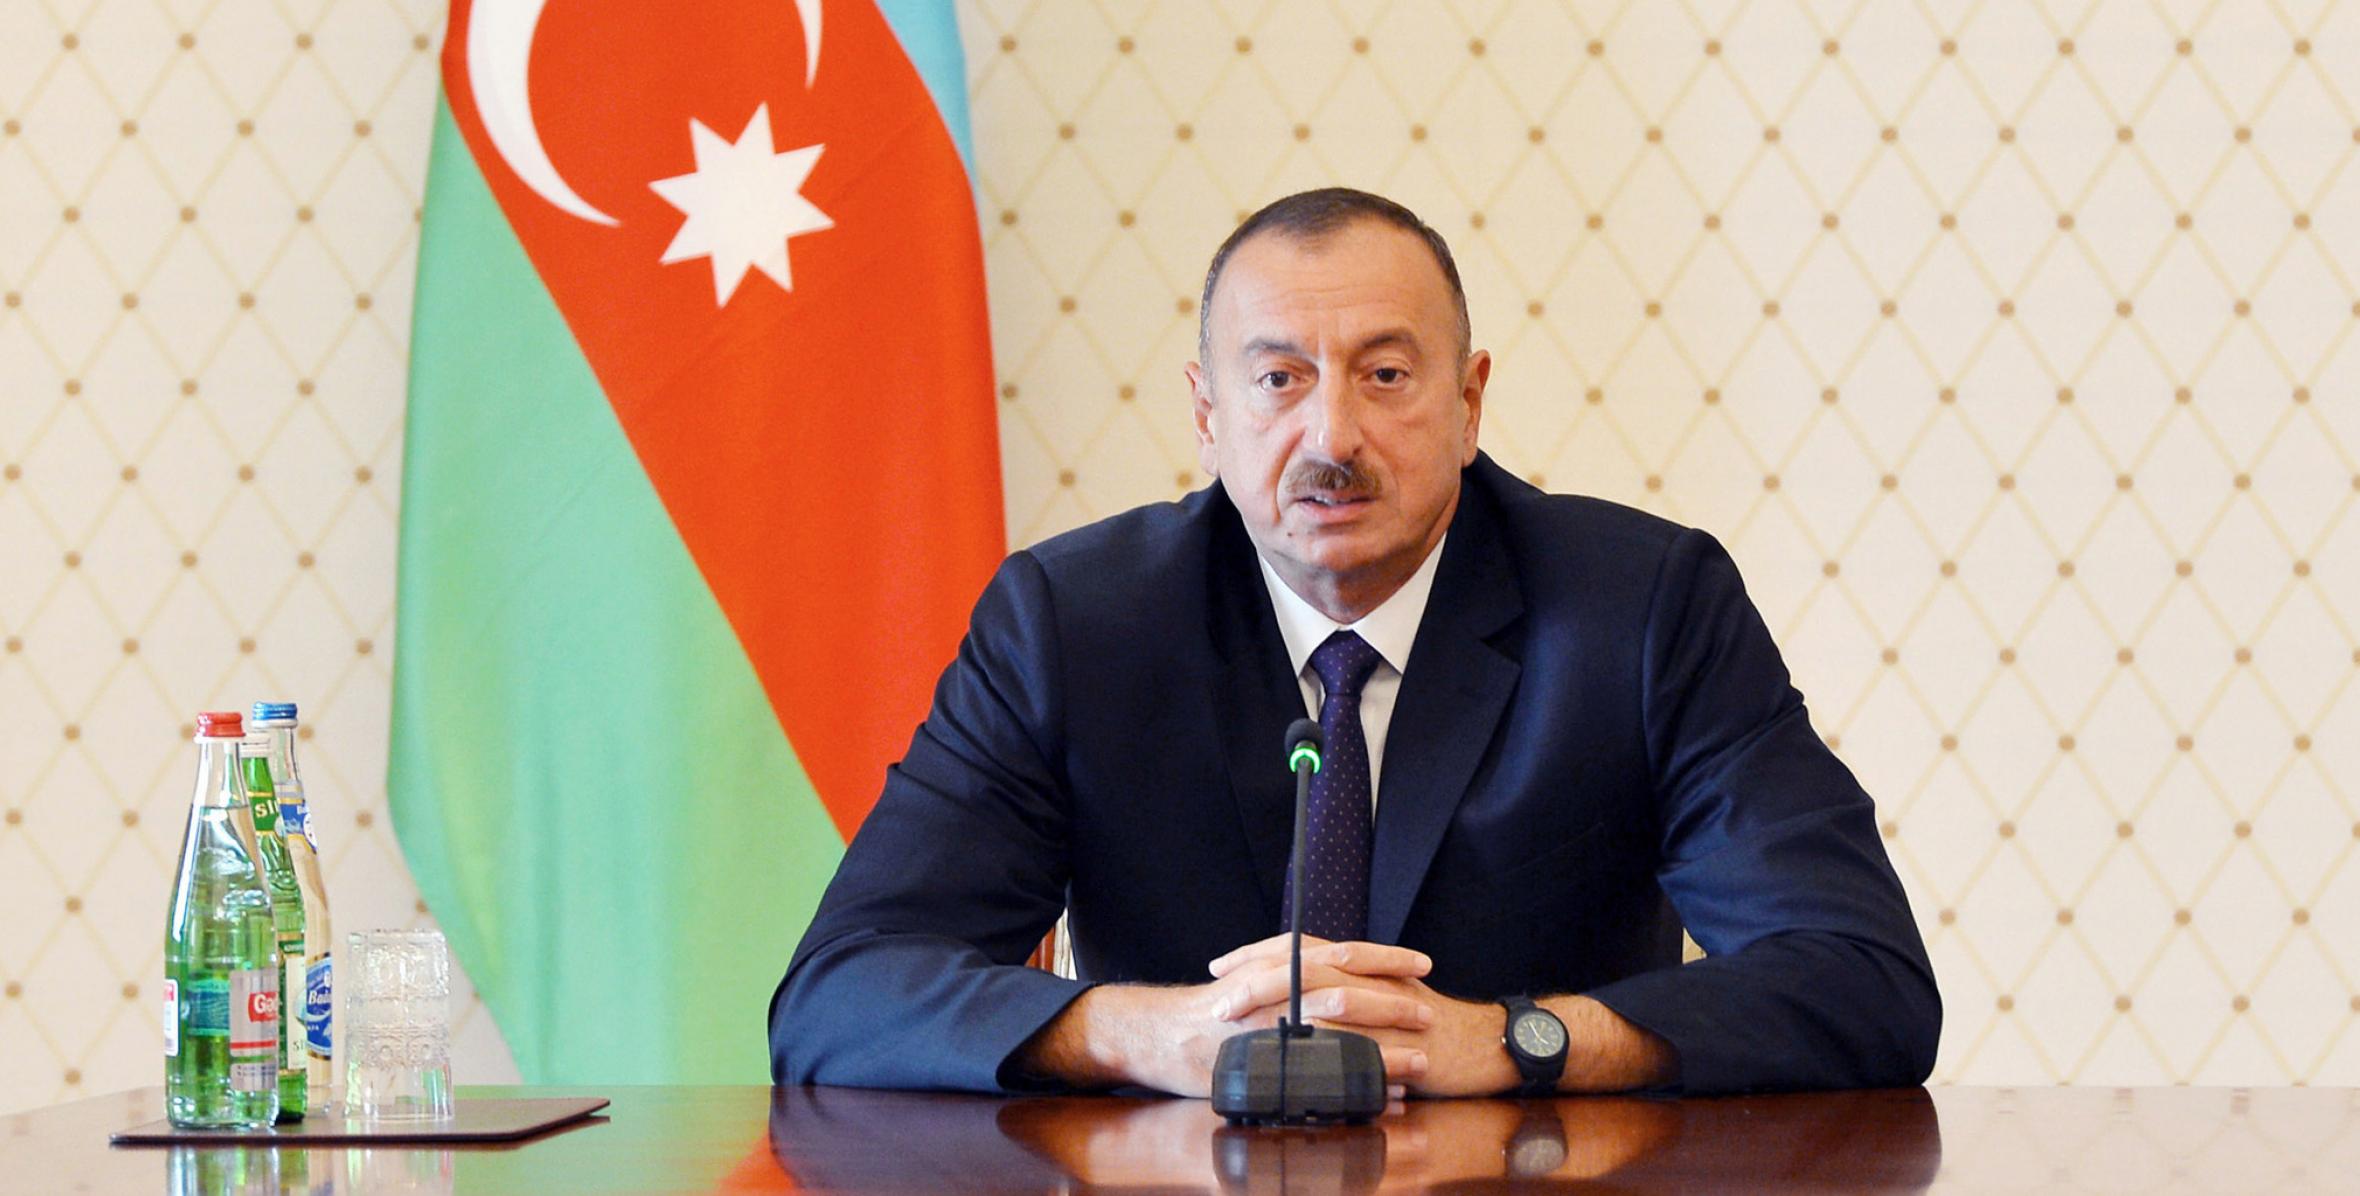 Speech by Ilham Aliyev at the meeting on economic issues and preparation of the State Budget for 2016